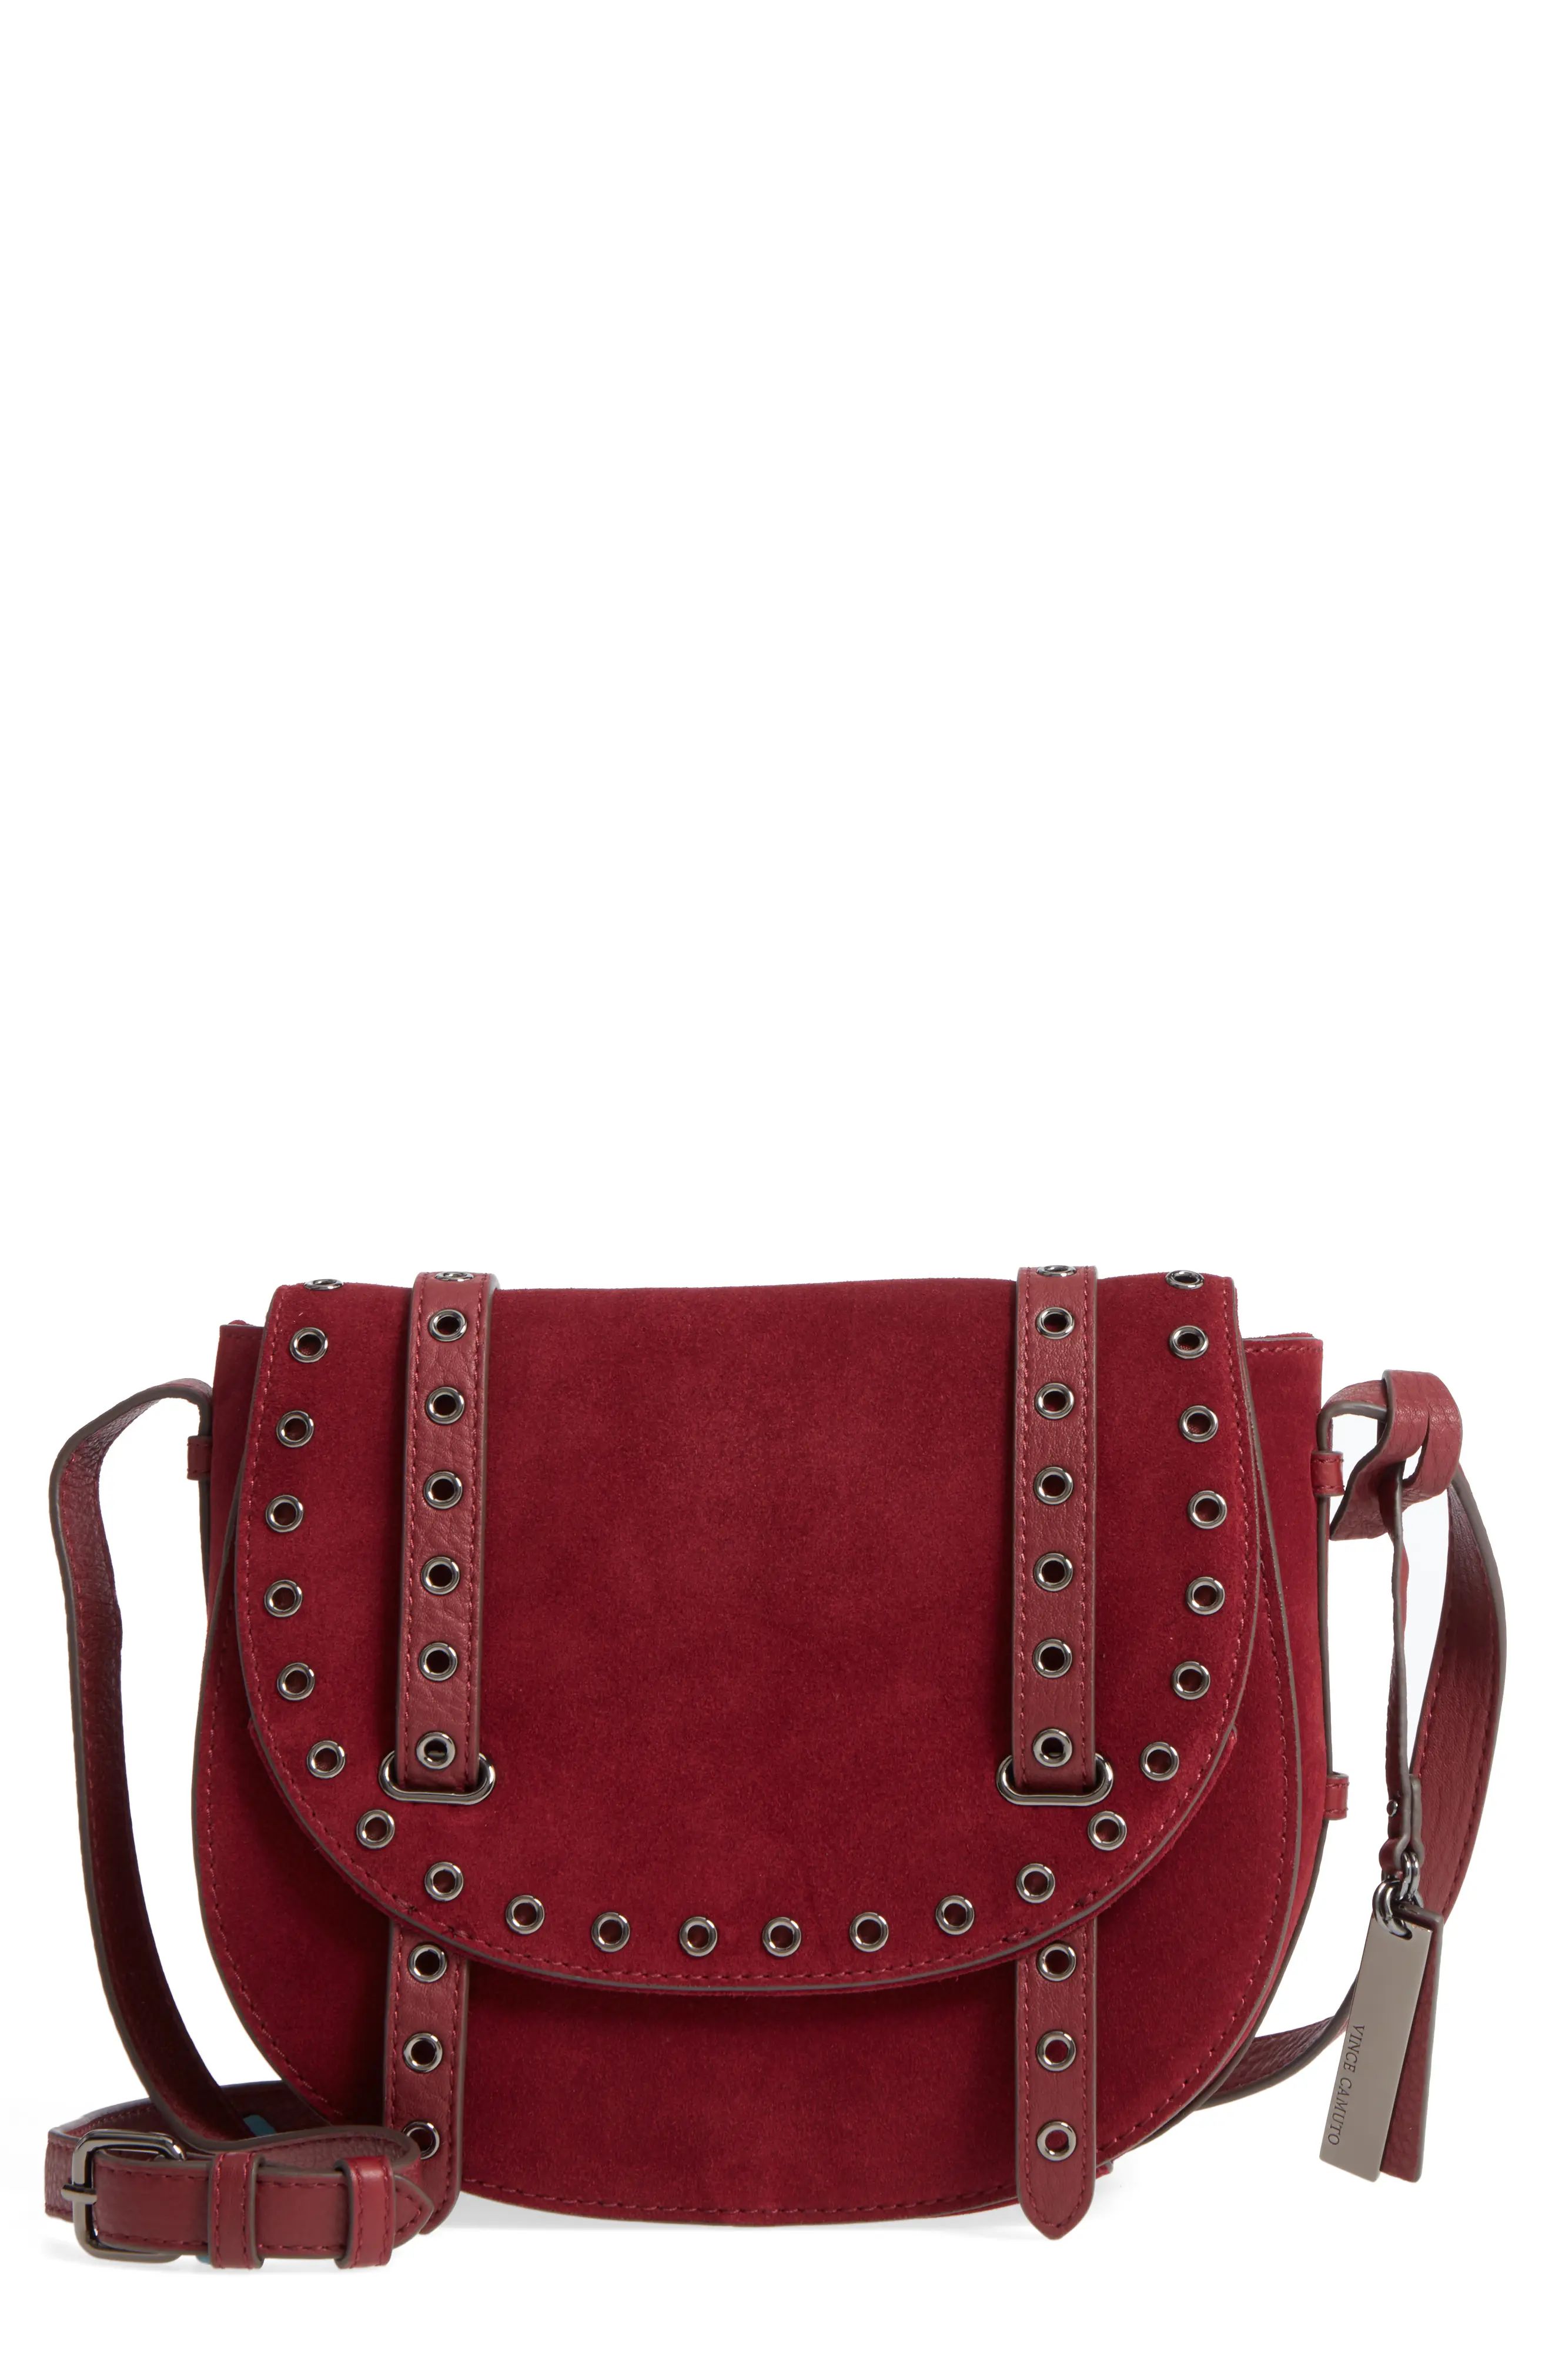 Areli Suede & Leather Crossbody Saddle Bag | Nordstrom